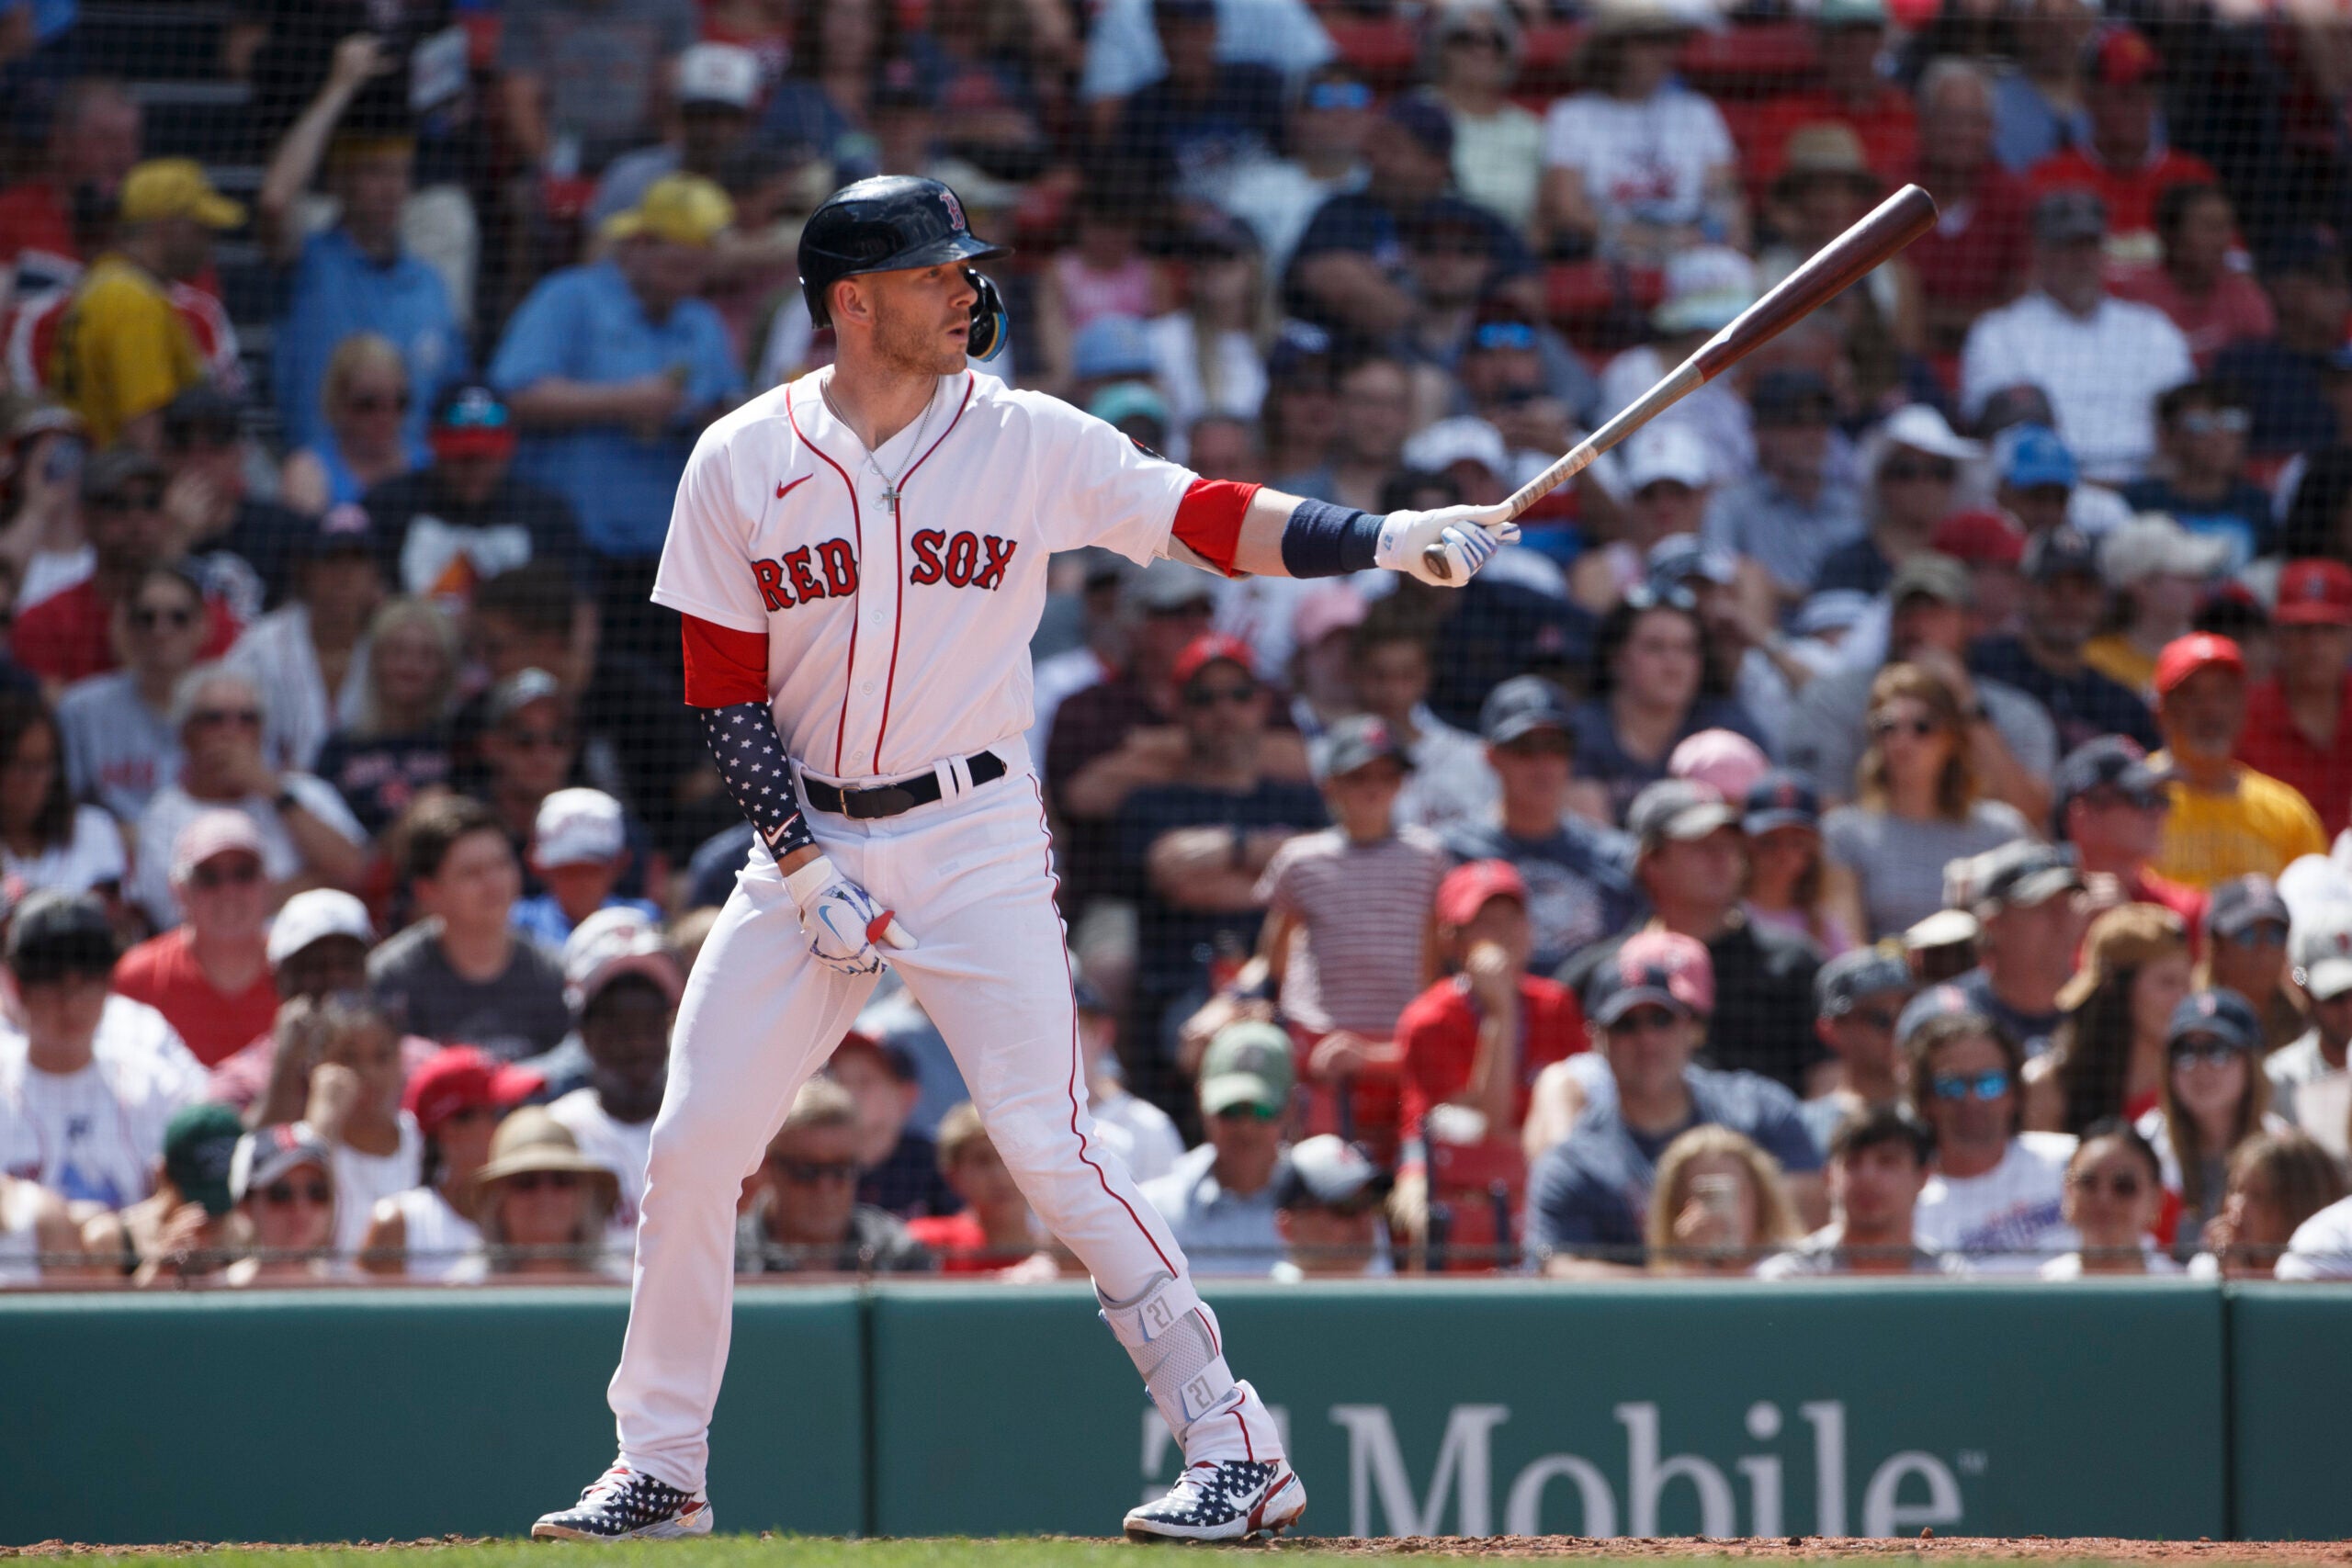 Boston Red Sox second baseman Trevor Story (10) loos down the pitcher at the bottom of the sixth inning at the ball game between The Boston Red Sox and the Tampa Bay Rays.The Boston Red Sox hosted the Tampa Bay Rays on July 4th, 2022.